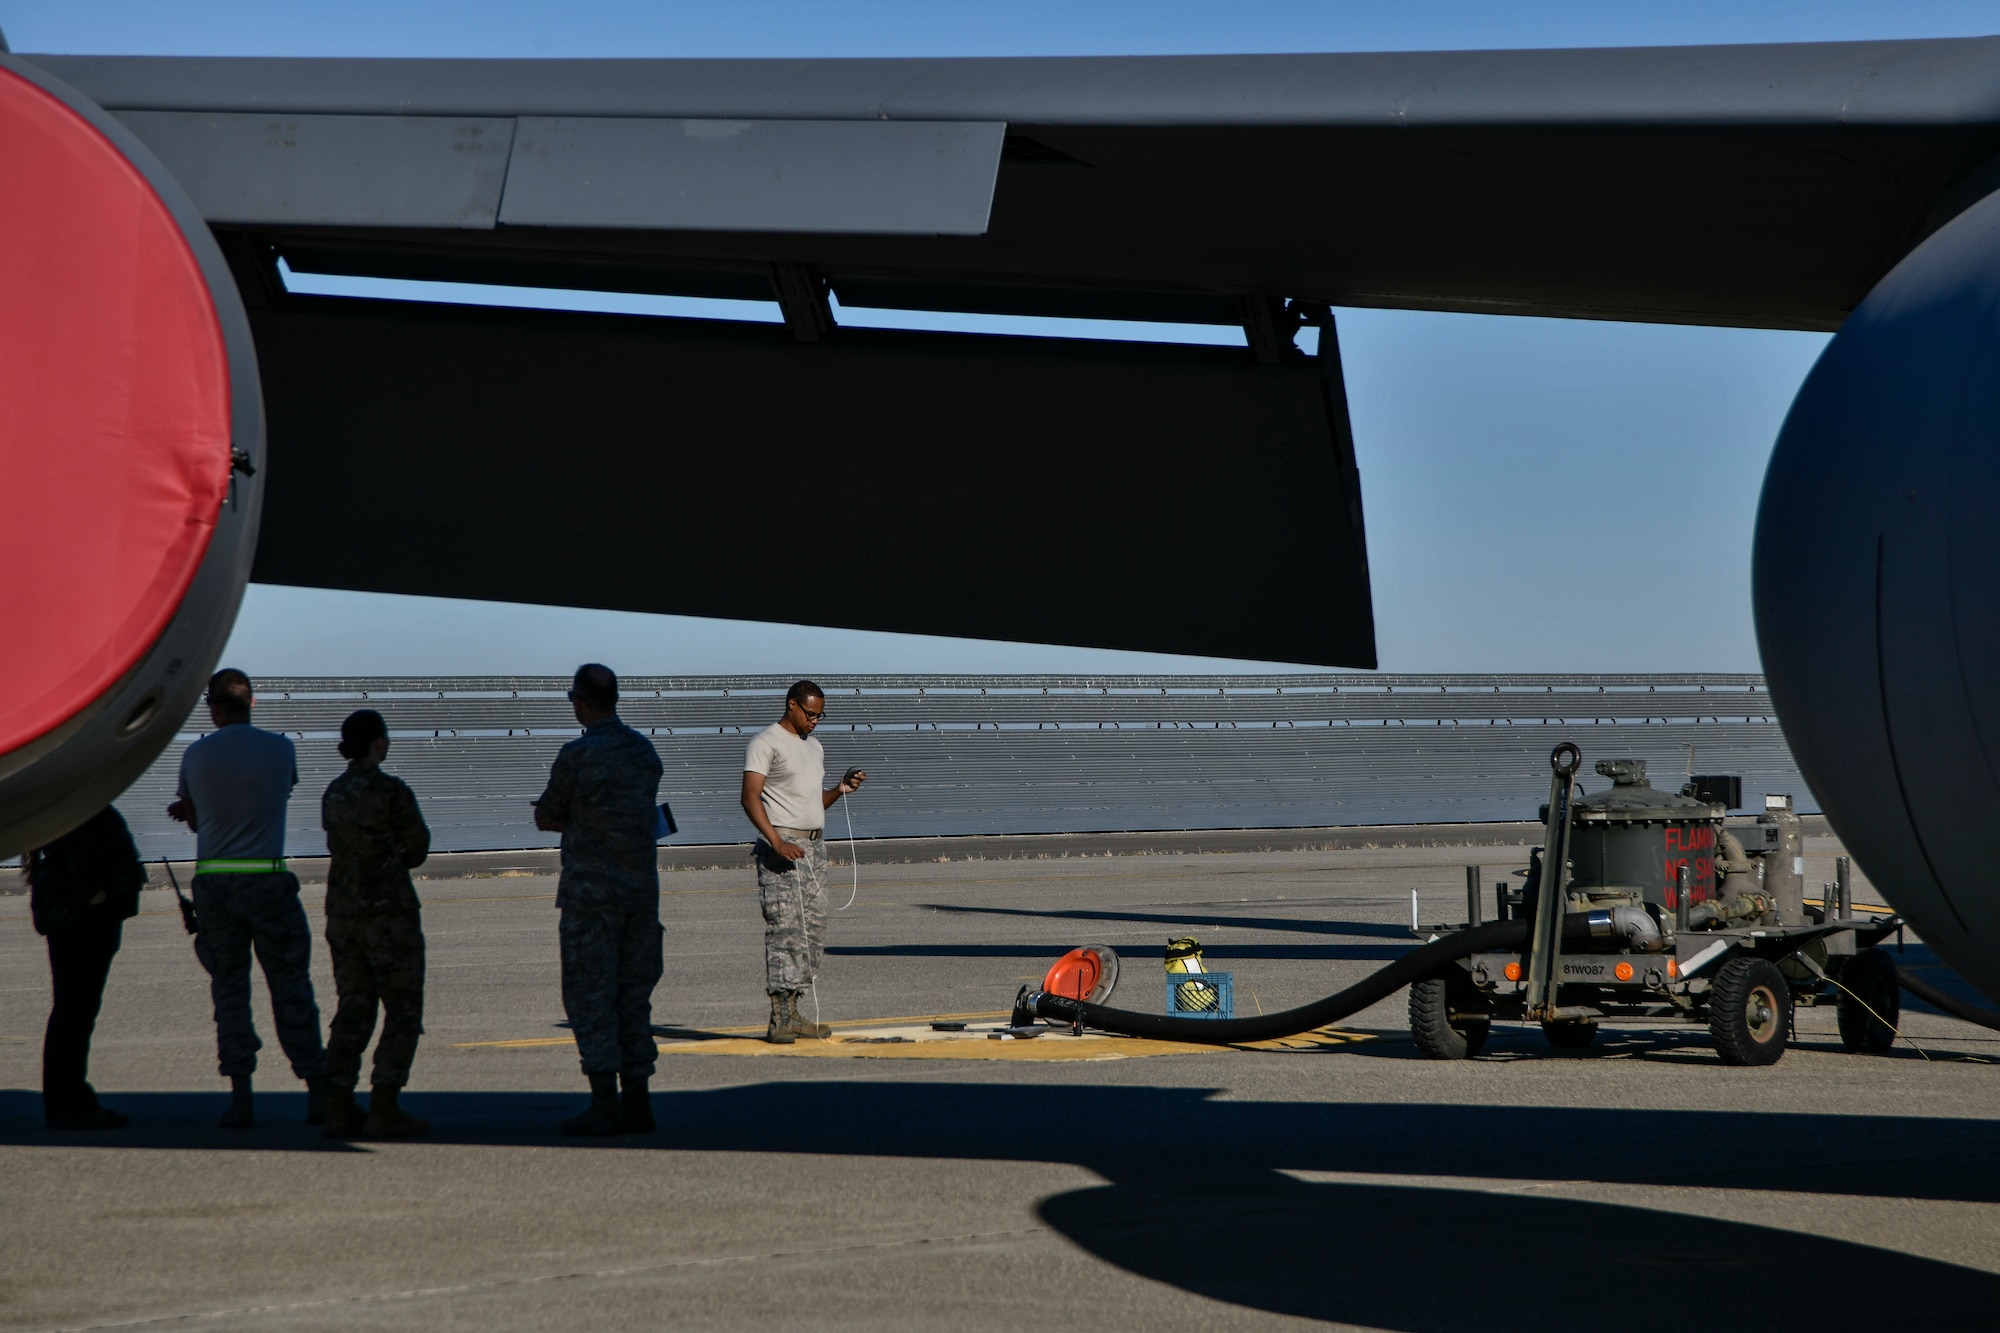 Leadership from both the 9th Logistics Readiness Squadron Petroleum, Oil and Lubricants flight and 940th Aircraft Maintenance Squadron watch as fuels distribution system operators and crew chiefs work together to refuel a KC-135 Stratotanker during a refueling exercise September 6, 2019 at Beale Air Force Base, California. (U.S. Air Force photo by Tech. Sgt. Alexandre Montes)